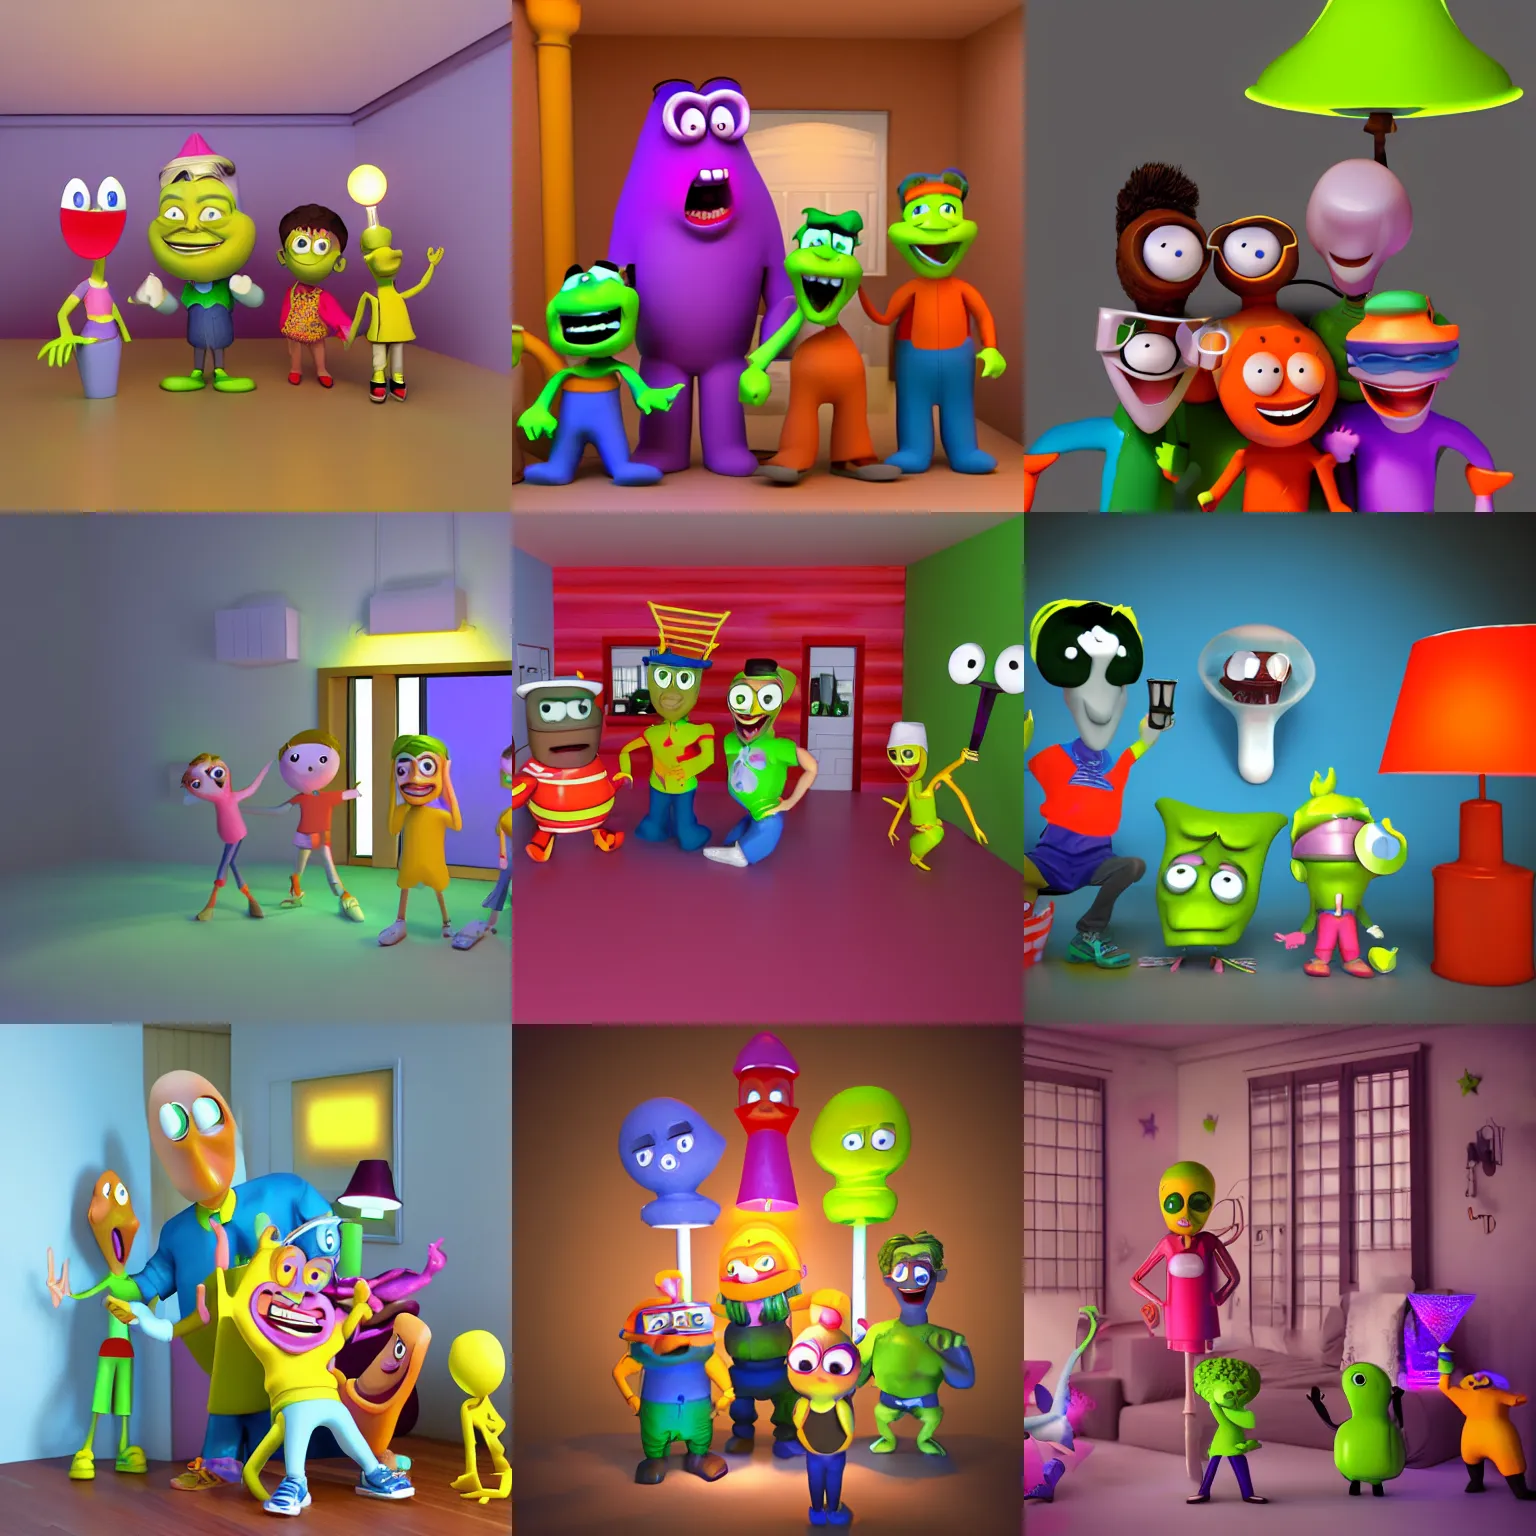 Prompt: 9 0 s 3 d render of nickelodeon characters in a crazy house, lit by a lamp